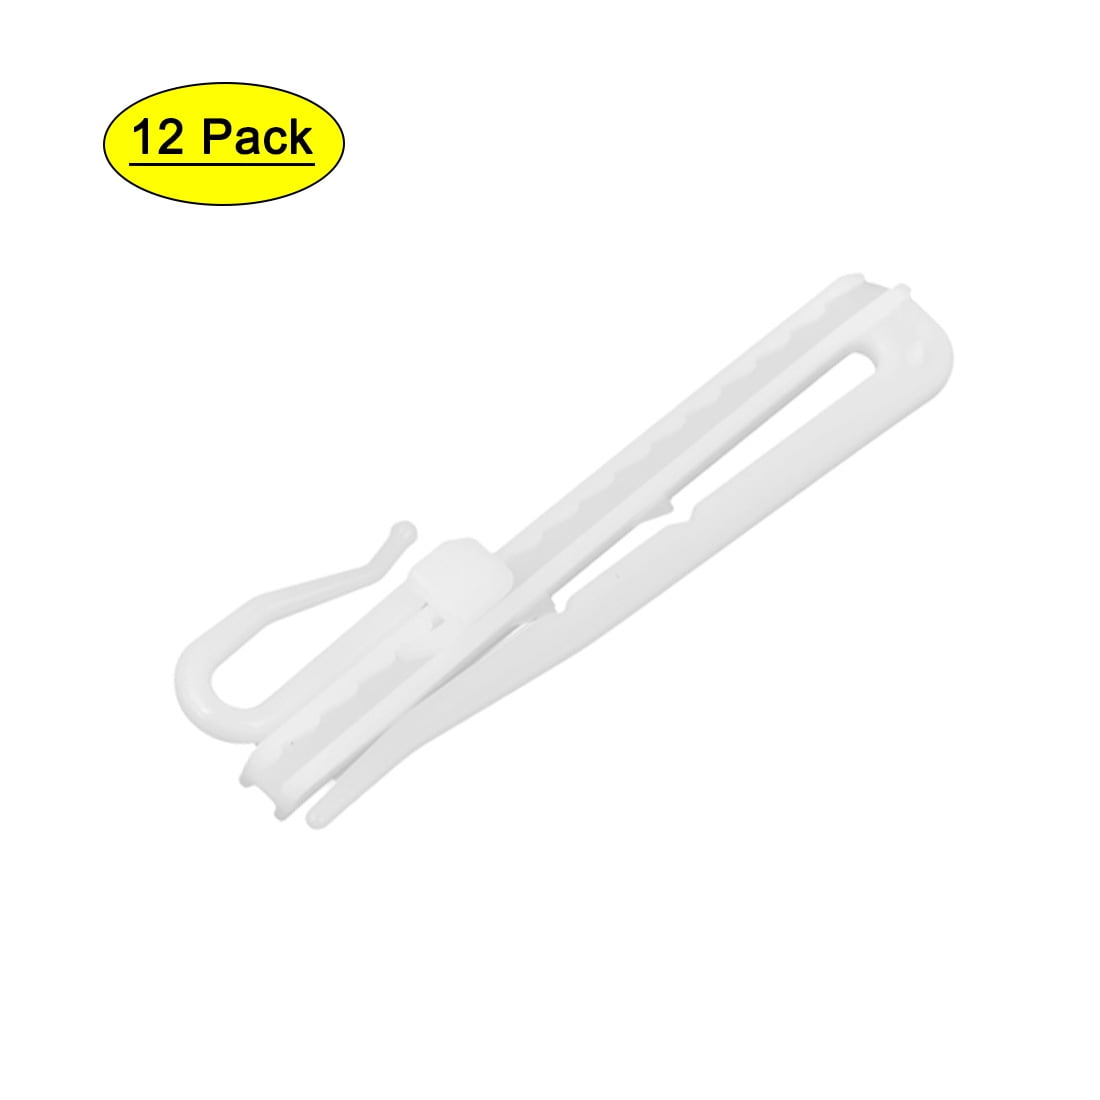 Qurton Curtain Hooks Large Size 3.8x1.6 cm for Windows, Doors & Shower Curtains - Curtain Header Tape Drapery White Plastic Hooks with Smooth Rounded